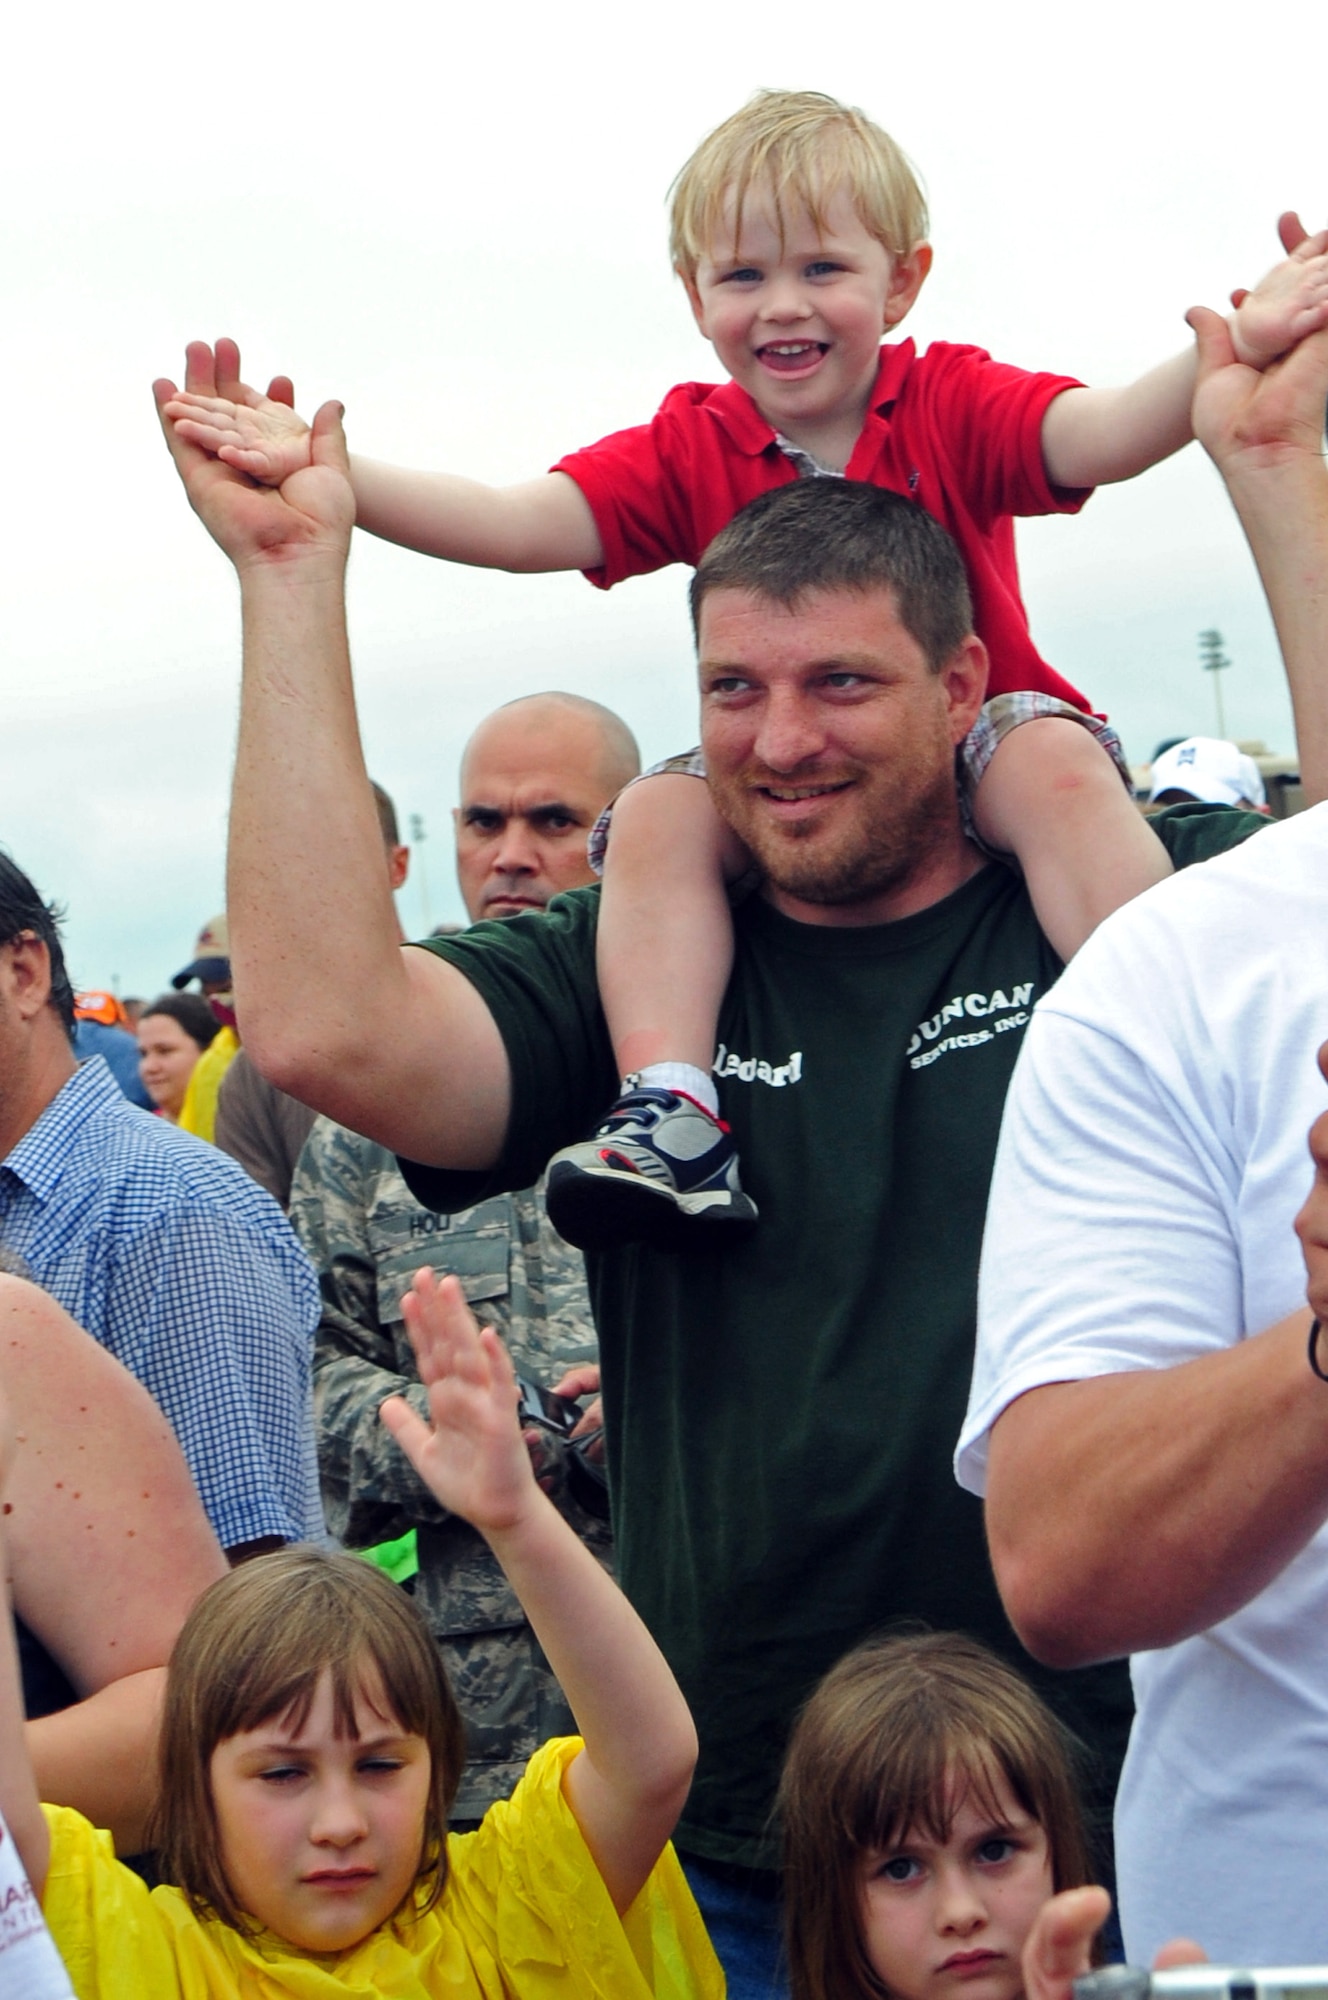 BARKSDALE AIR FORCE BASE, La., -- Leonard Jones of Bossier City and his son Logan, 3, clap along with country music recording artist Aaaron Tippen during a performance on the final day of the Defenders of Liberty Air Show, May 10. More than 1,000 air show spectators waited through inclement weather to see Aaron perform on Mother's Day. (U.S. Air Force photo by Senior Airman Joanna M. Kresge)(Released)